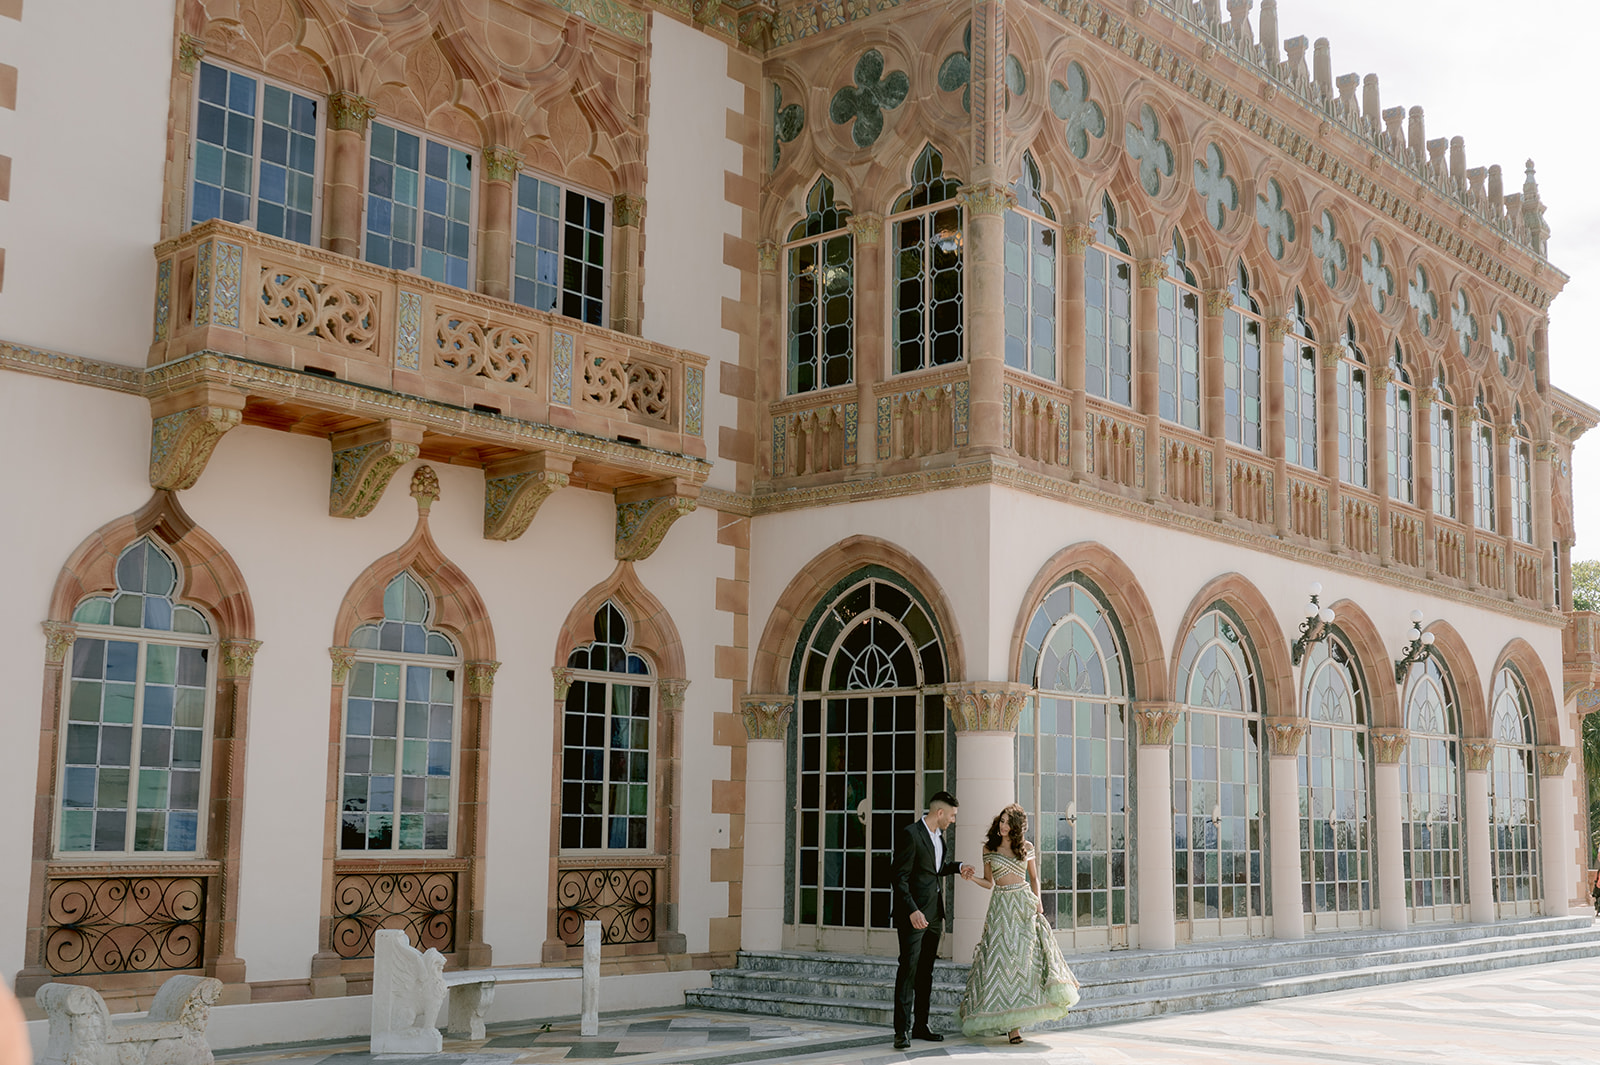 "Indian couple in love poses in front of the breathtaking Ca' d'Zan mansion at the Ringling Museum"
